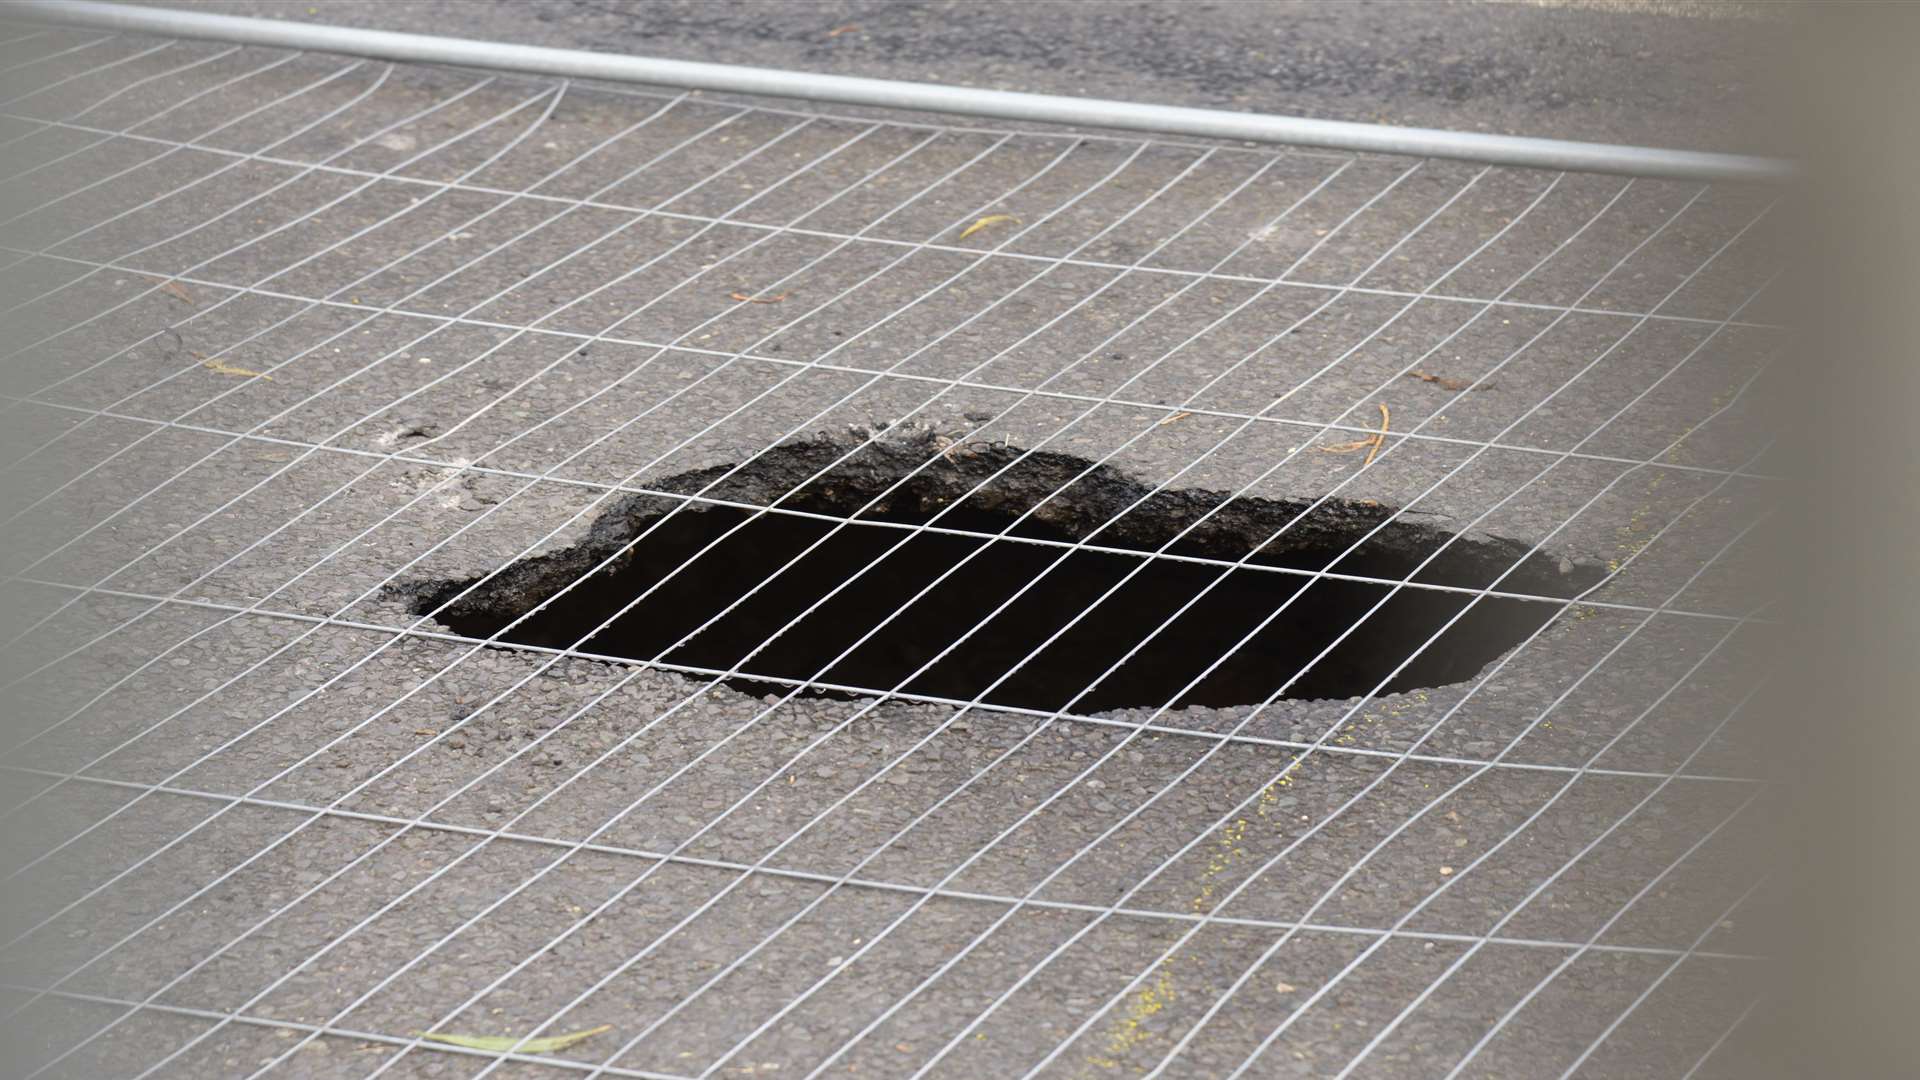 The sinkhole in St Mary's Road, Dymchurch. Picture: Chris Davey